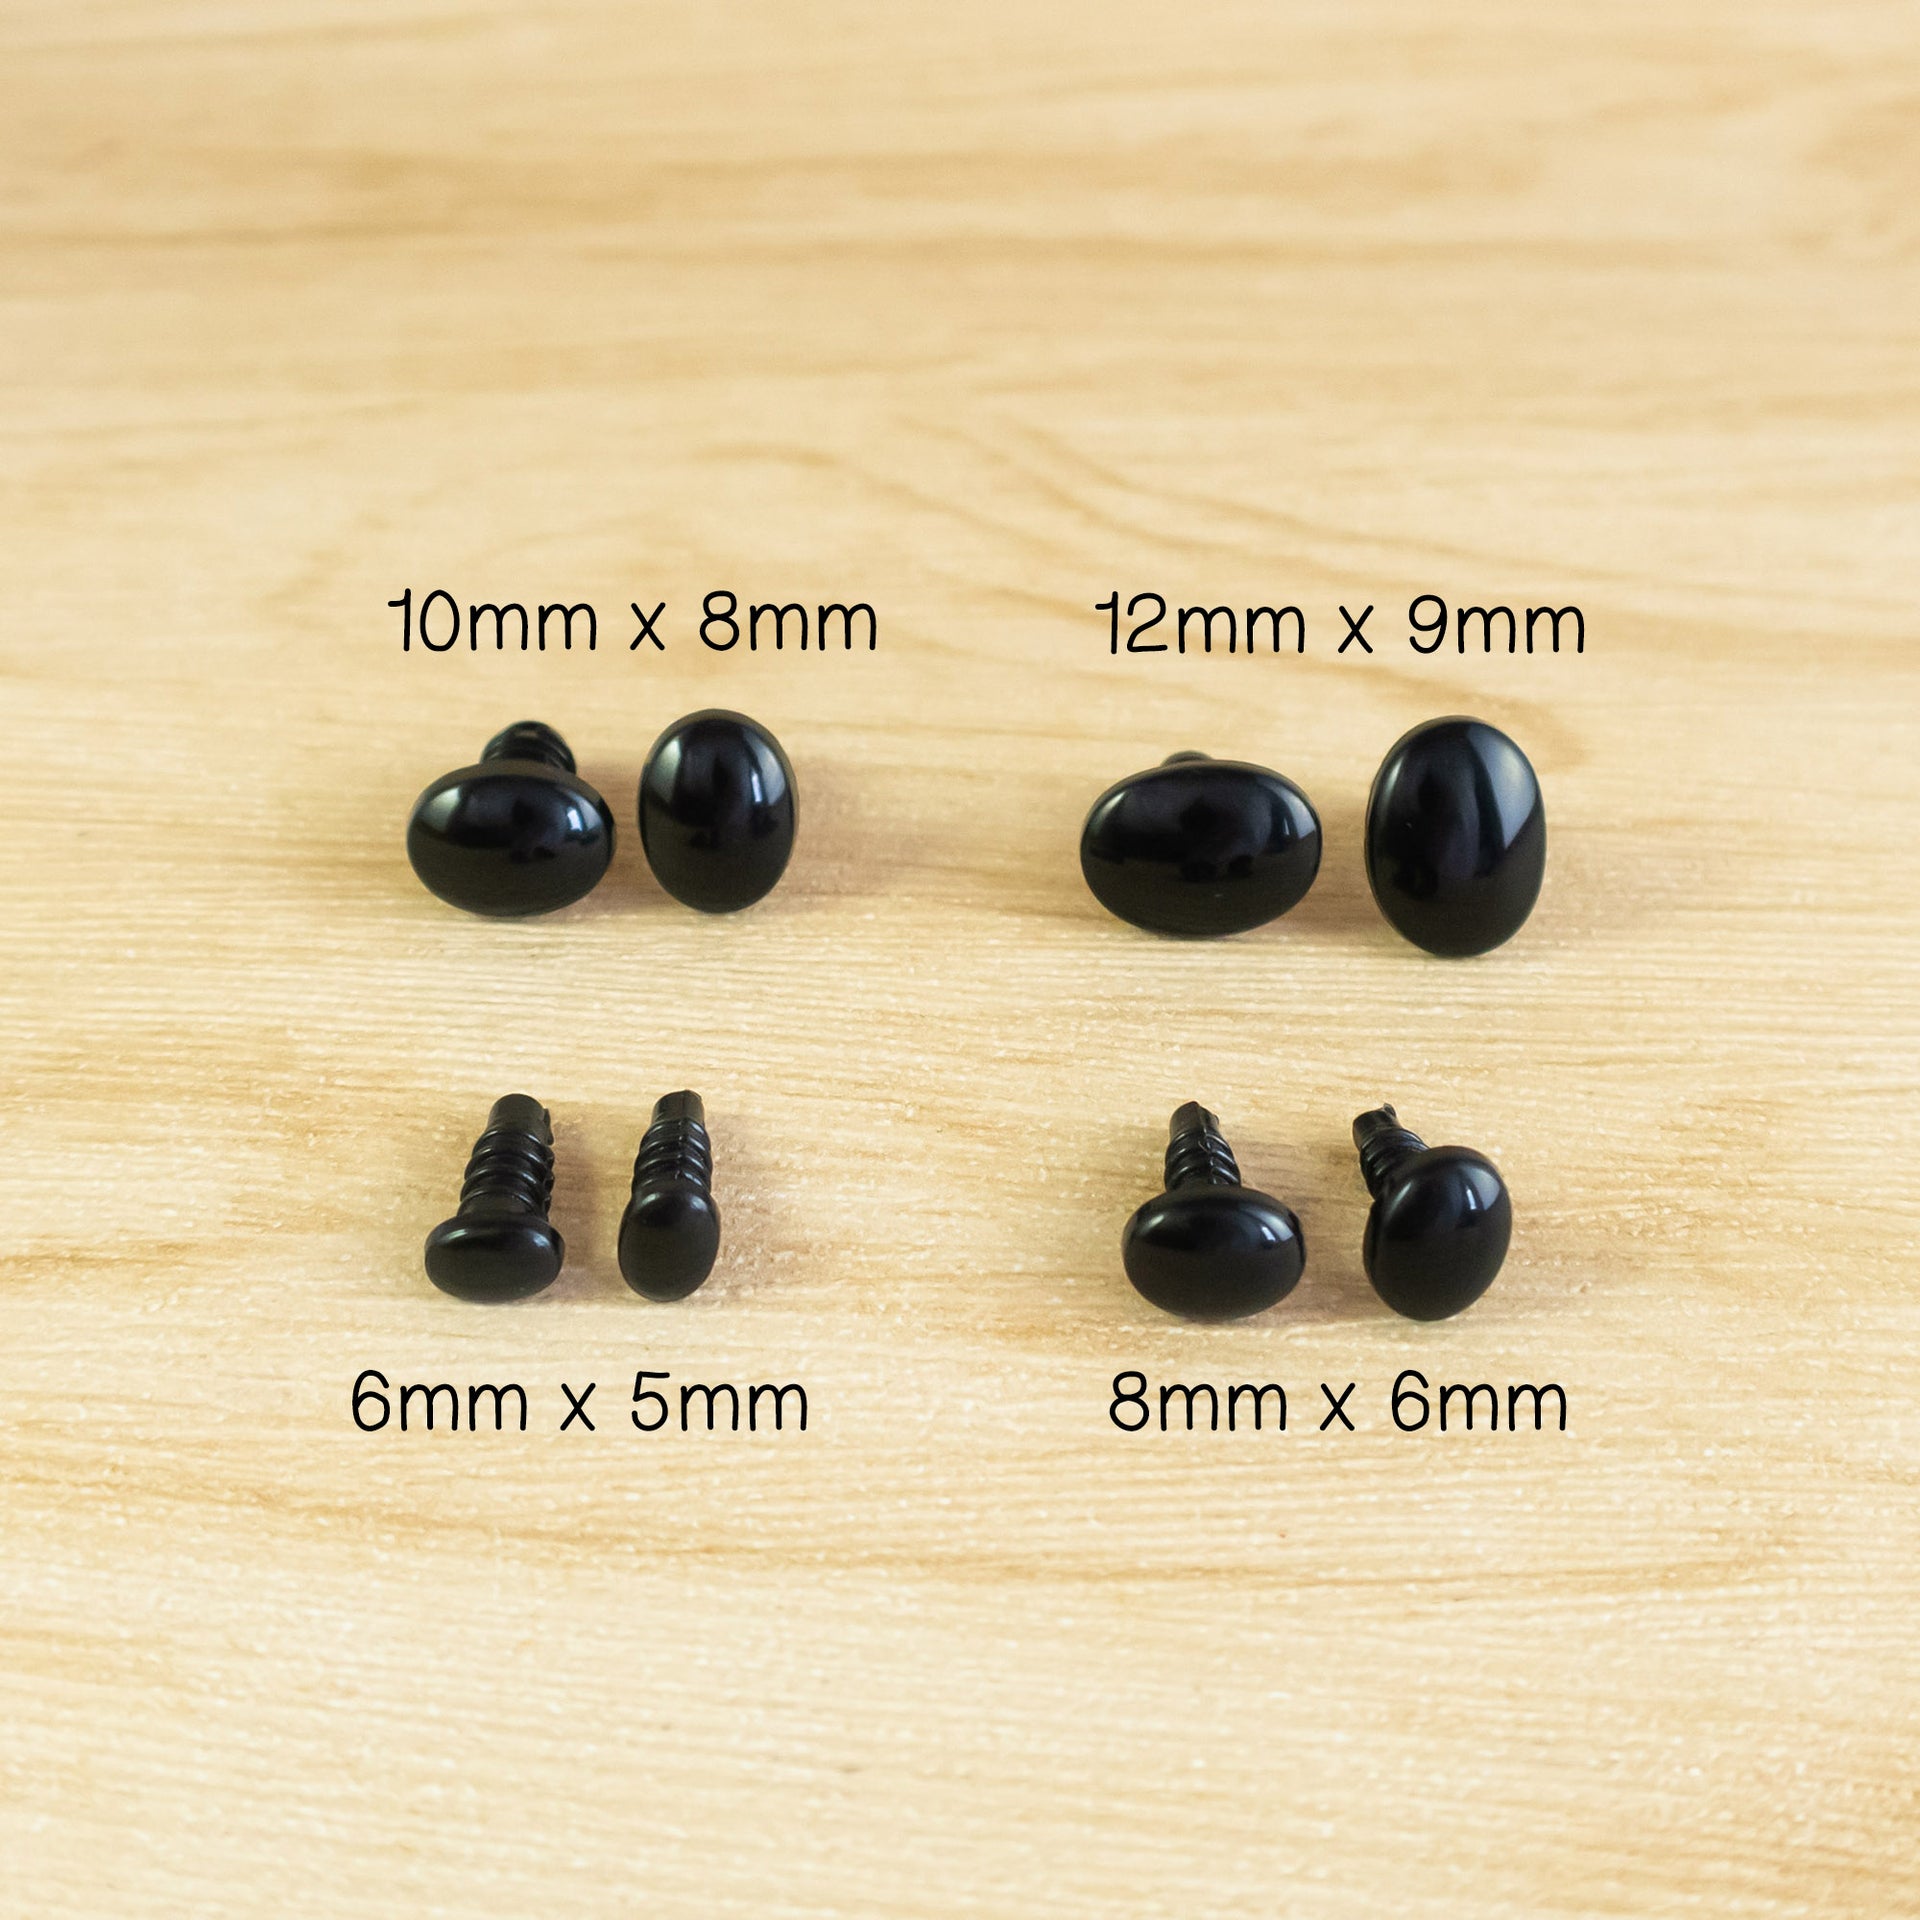 12mm White Safety Eyes with Black Centers - 5 Pairs